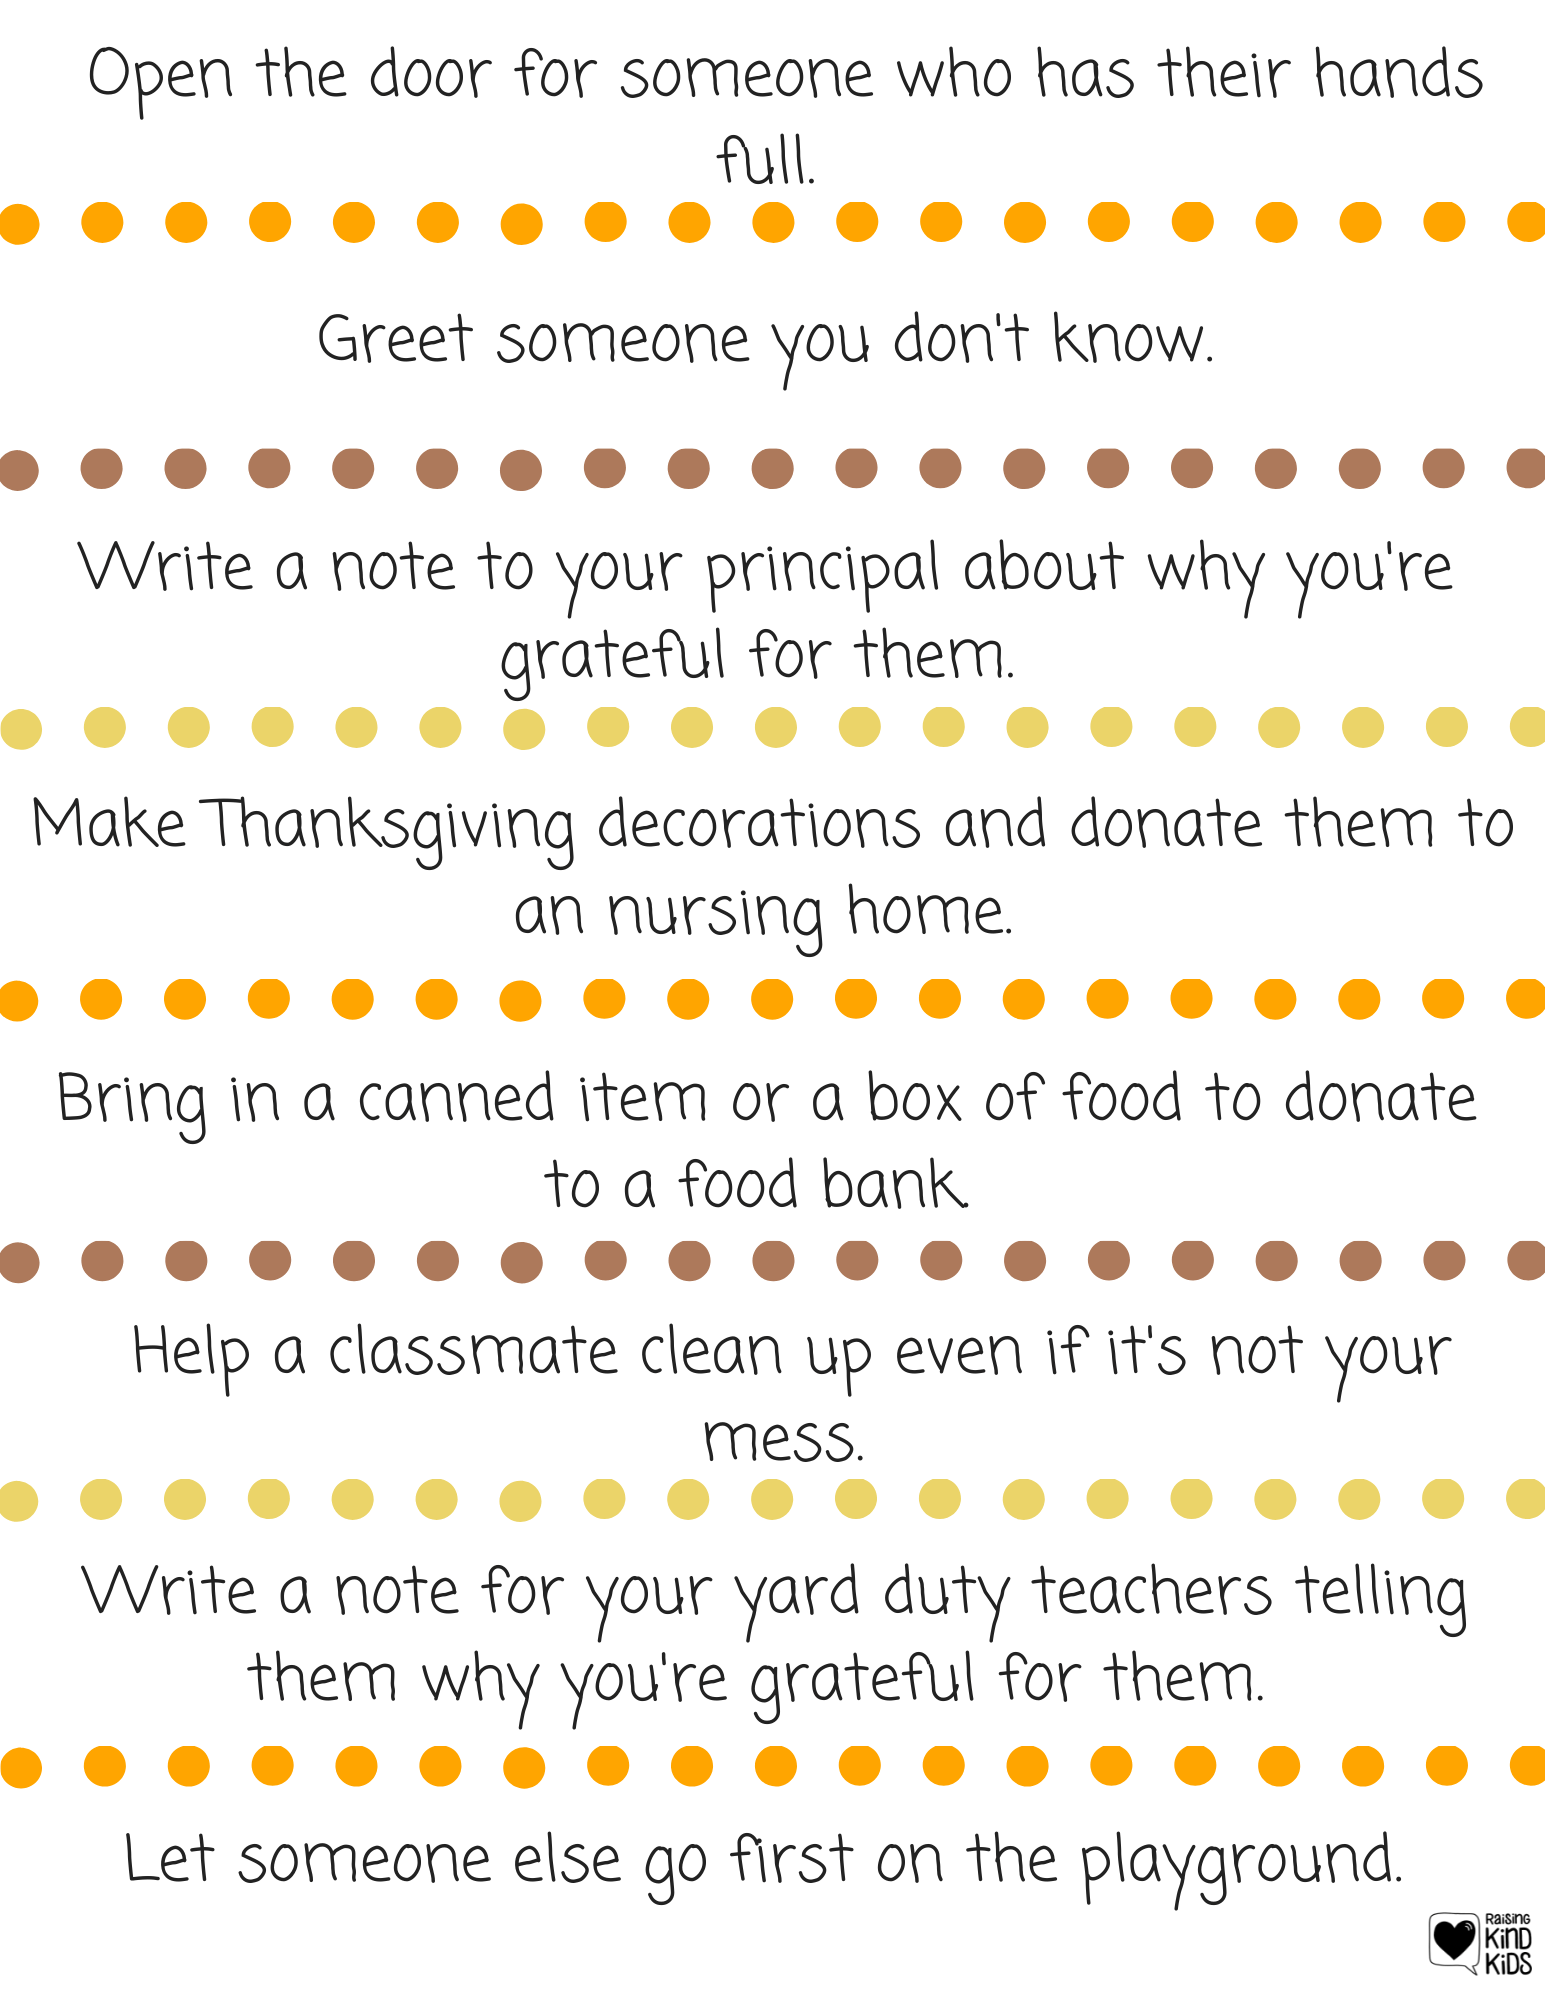 Countdown to Thanksgiving Break with kindness with this Paper chain freebie printable...each day you do one kind act as you get closer to break!